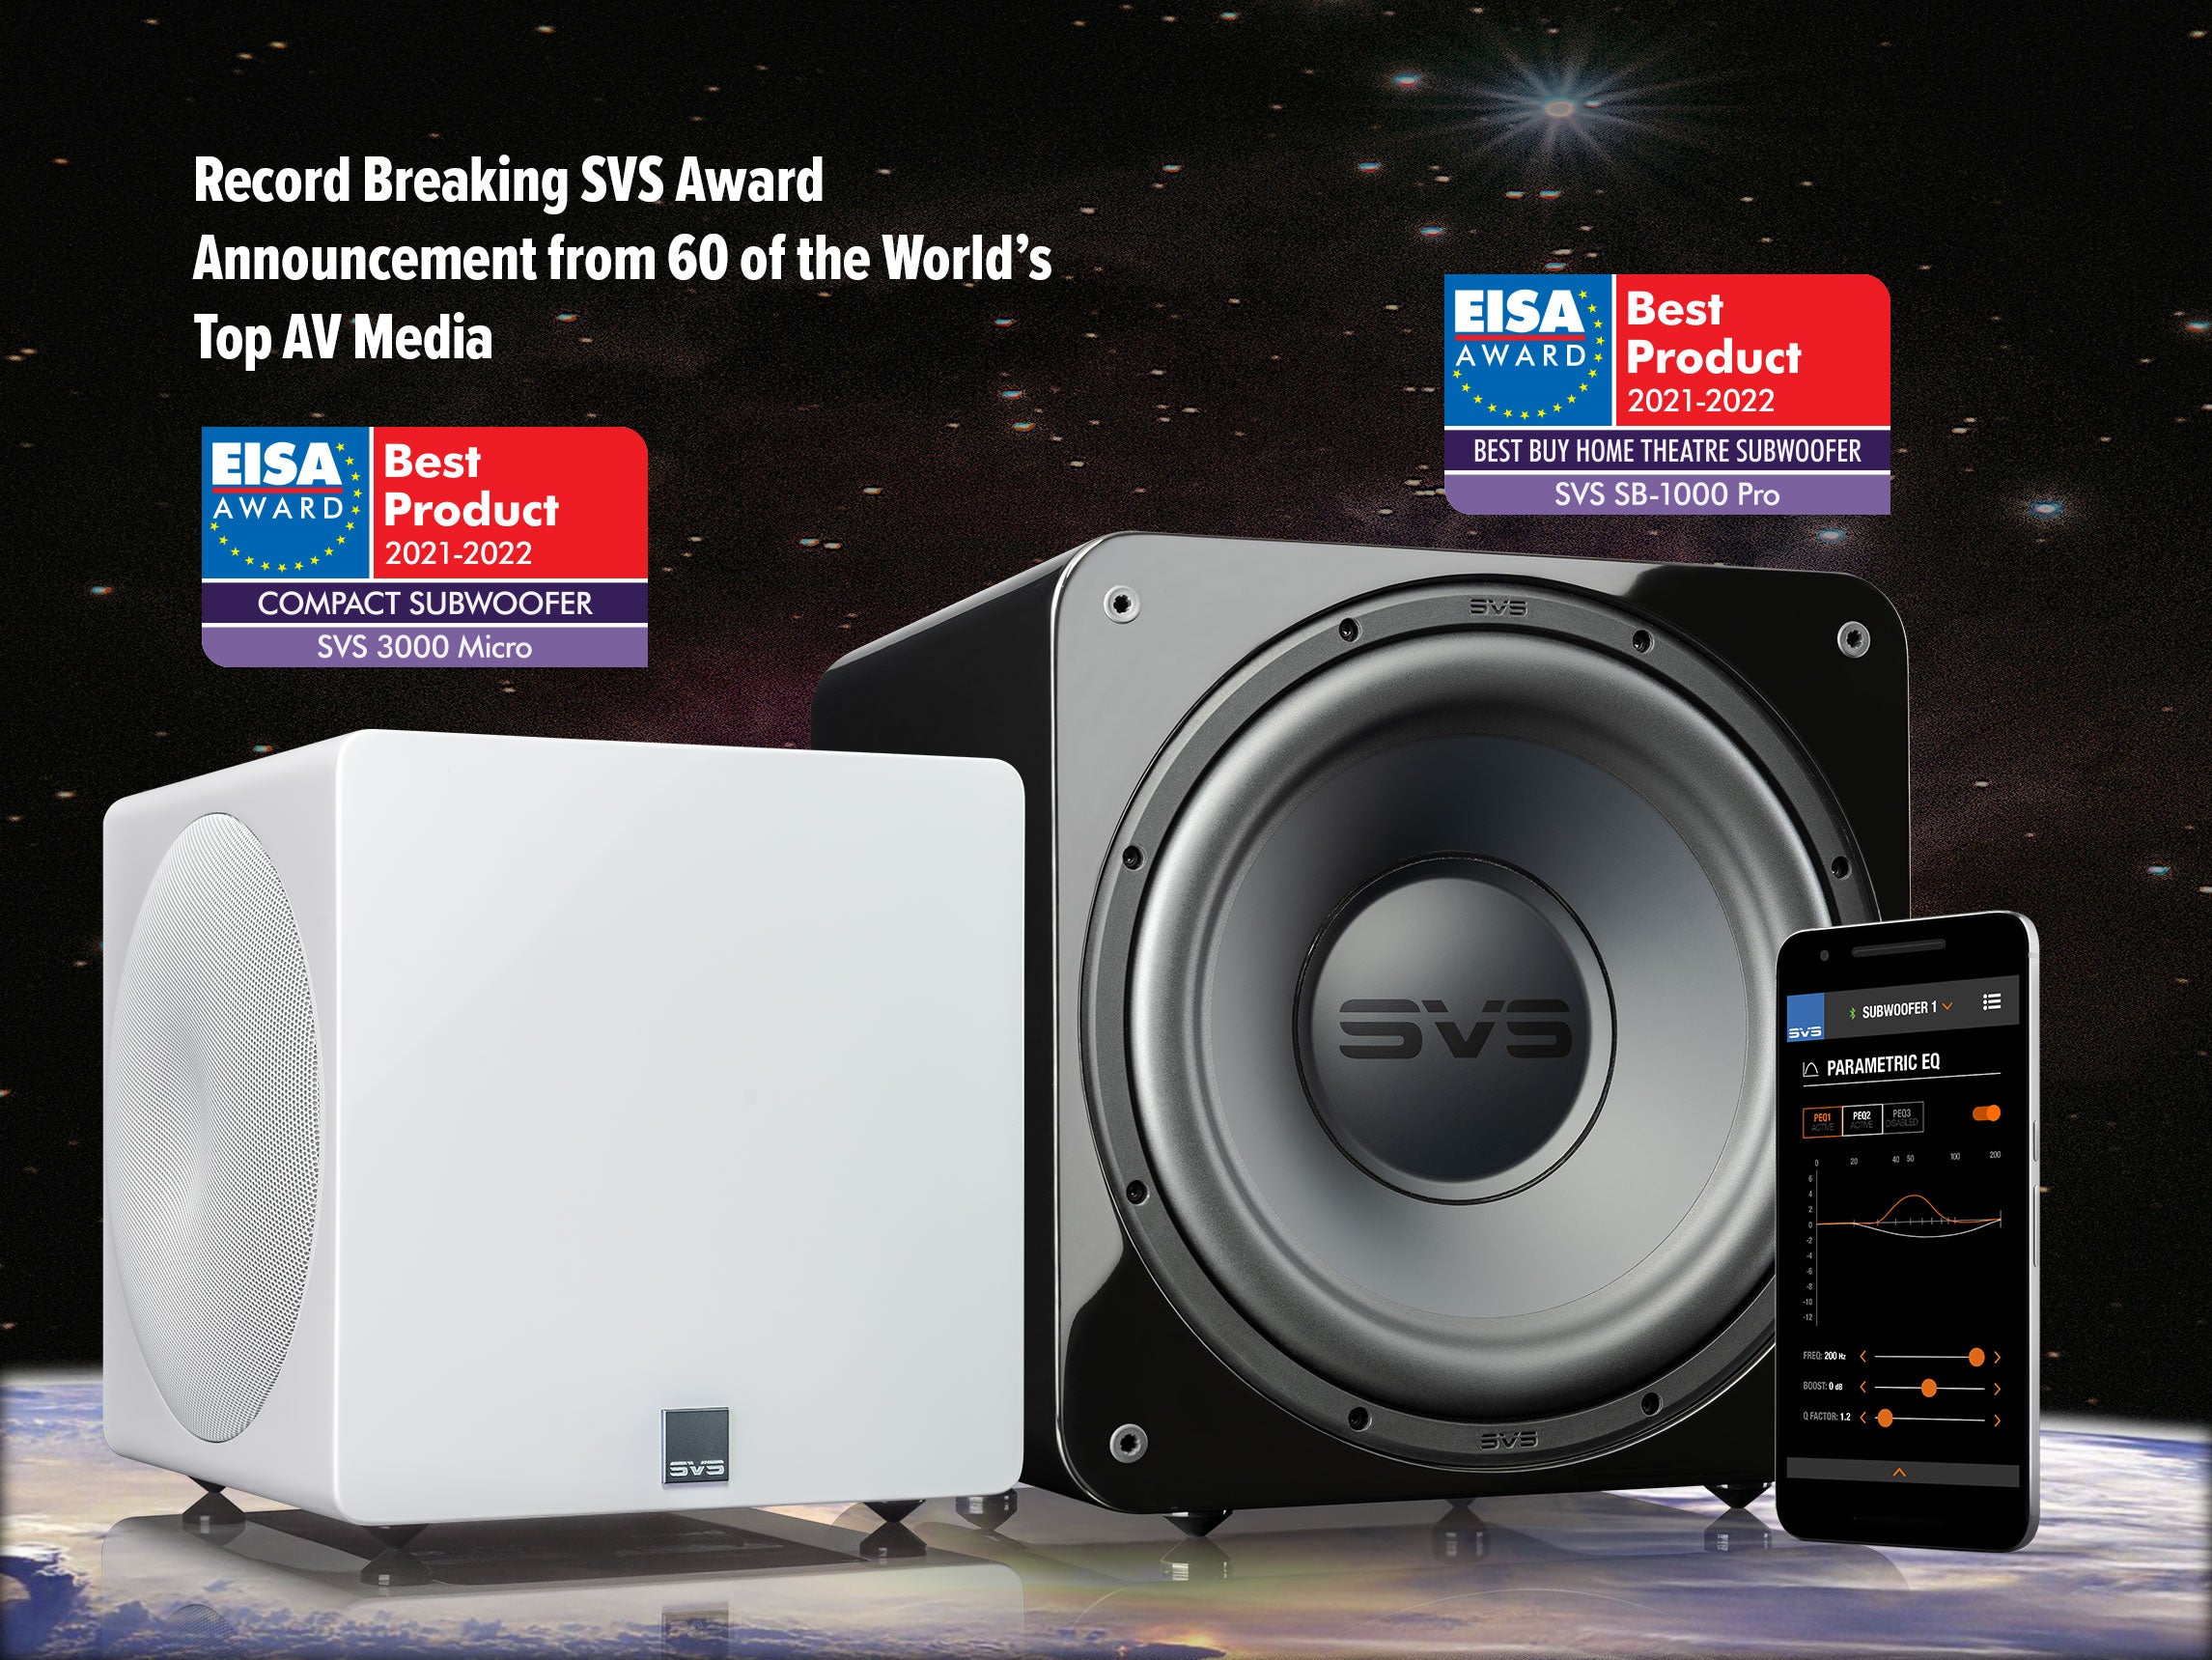 SVS Earns for Best Compact Subwoofer (3000 Micro) Best